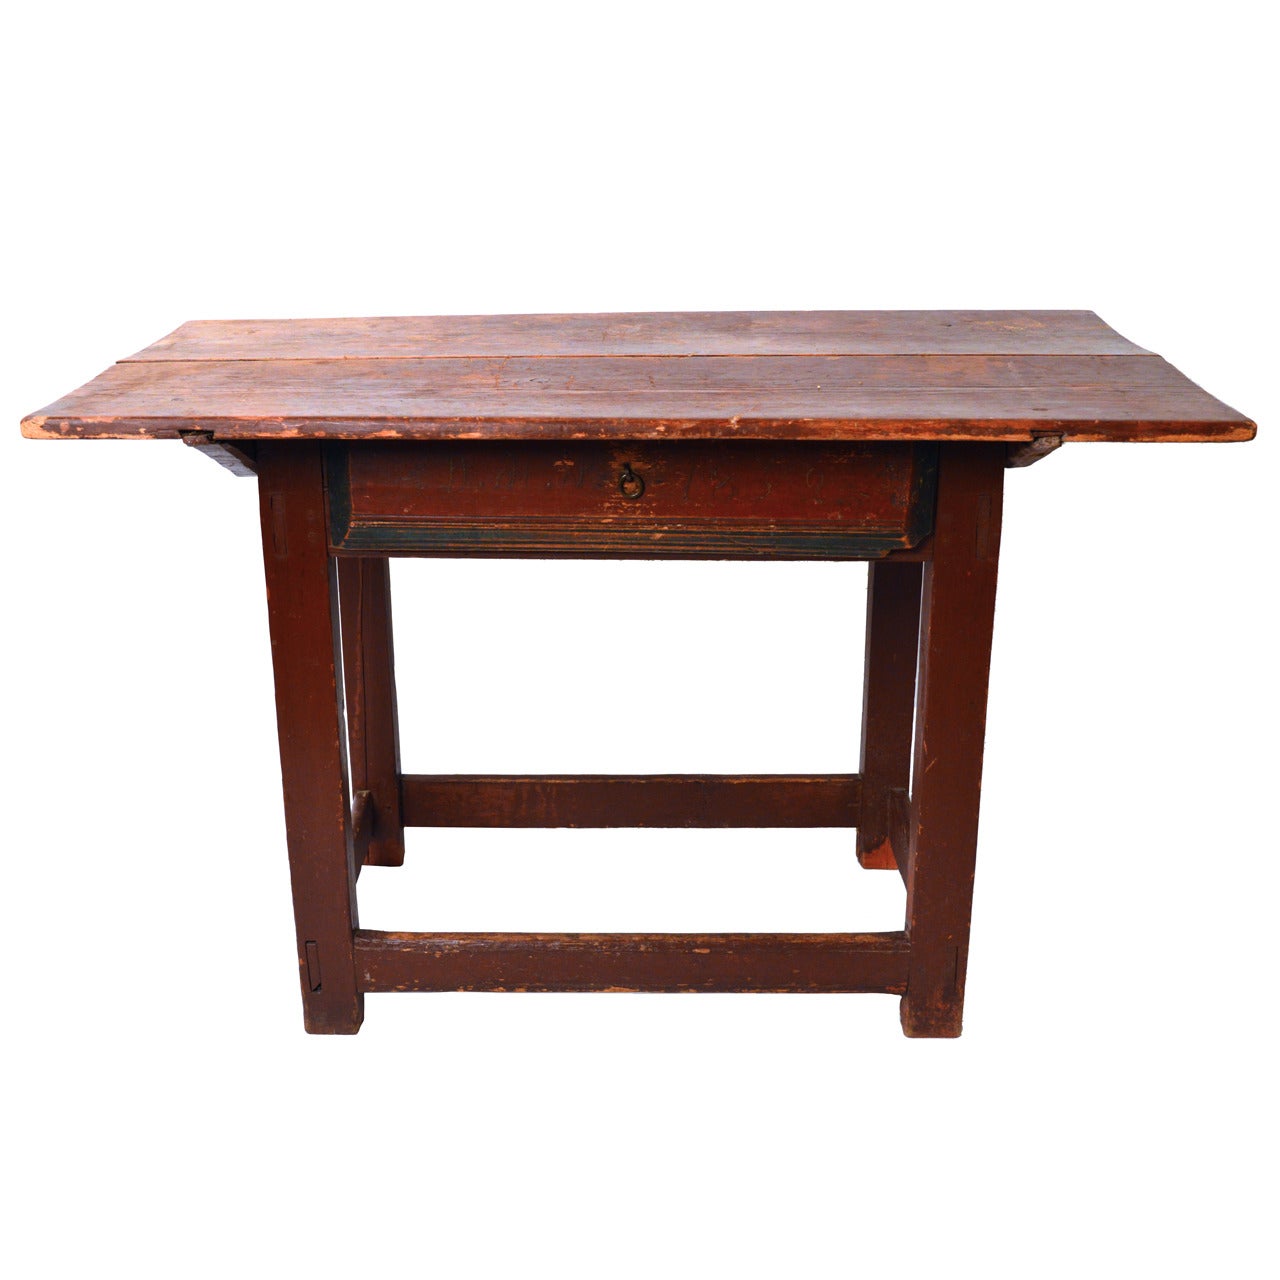 19th Century Swedish One-Drawer Table Retaining the Original Paint and Hardware For Sale